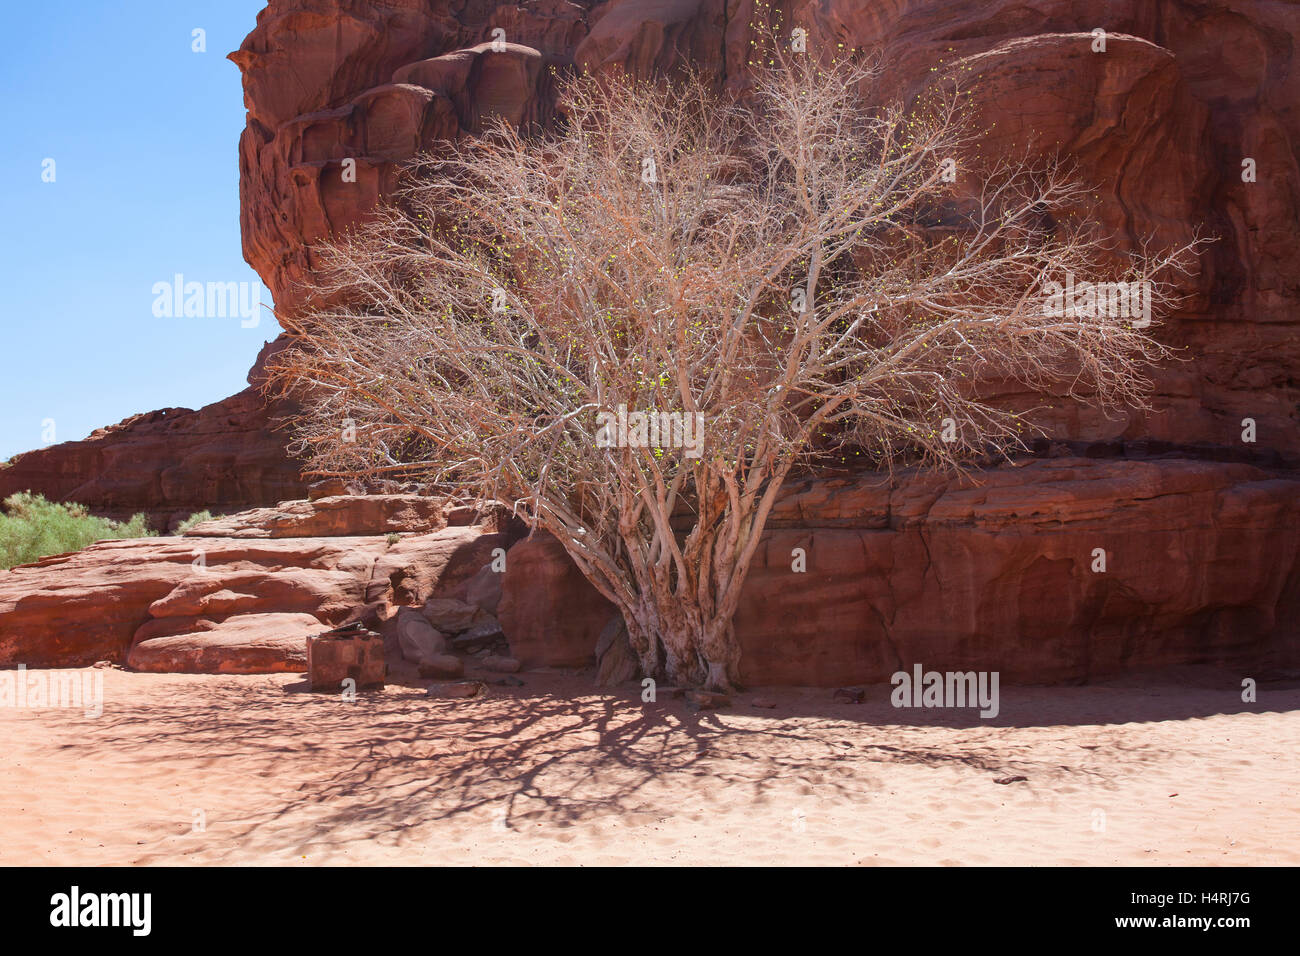 A dry tree with some buds in the Wadi Rum desert, Jordan, Middle East. Stock Photo